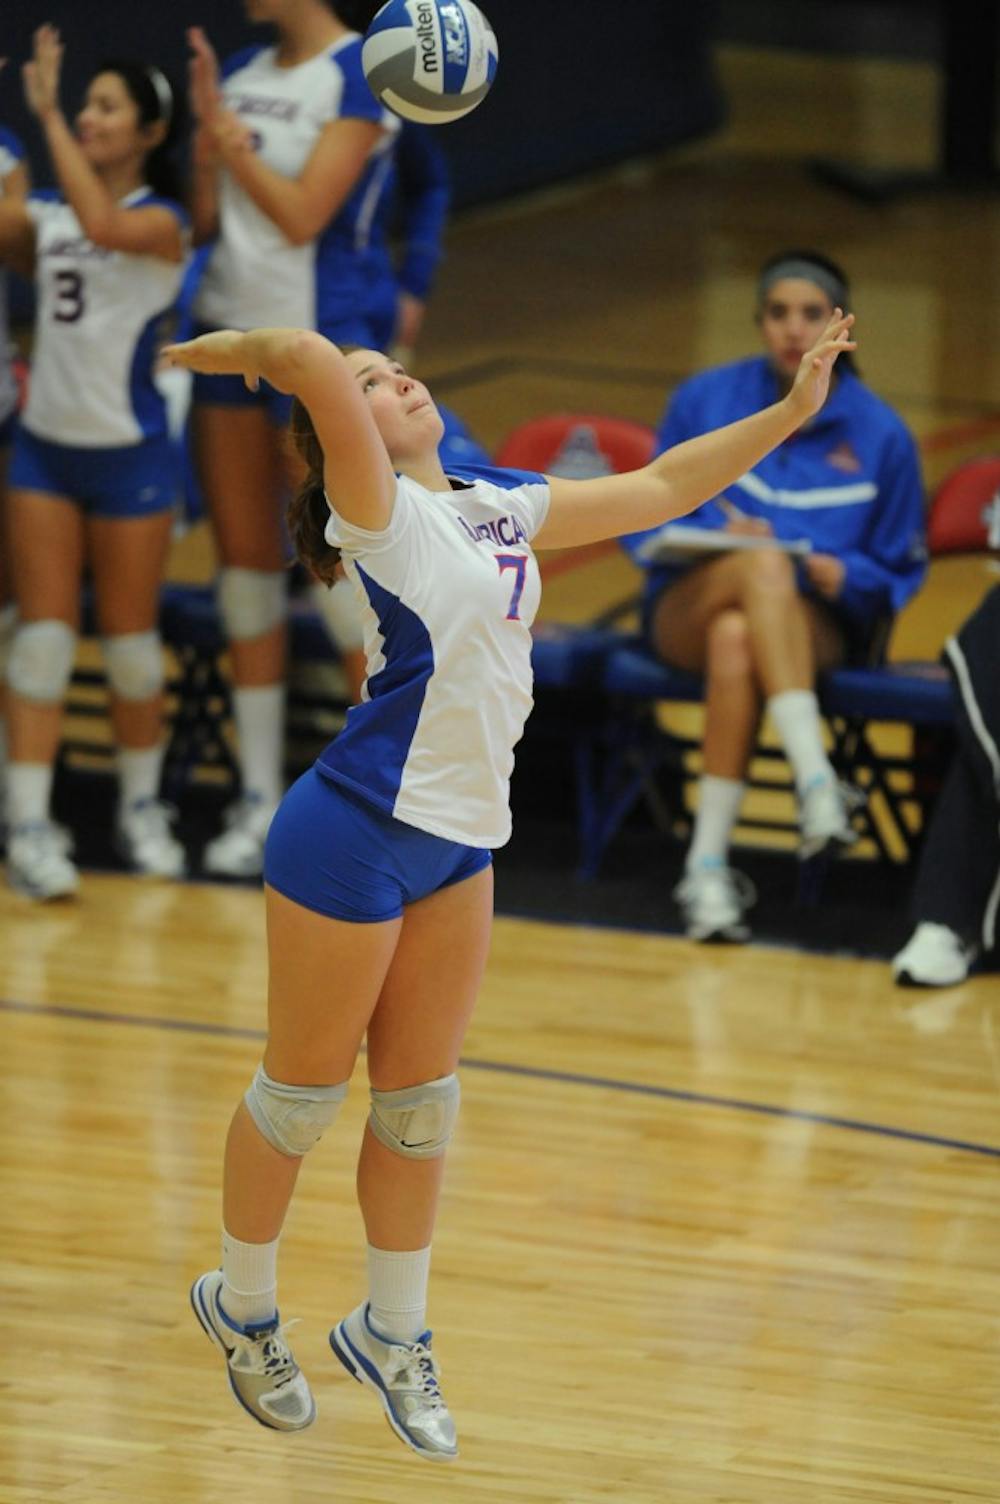 	Megan Rosburg was one of two Eagles named to the All-Tournament team at the Sacred Heart Invitational